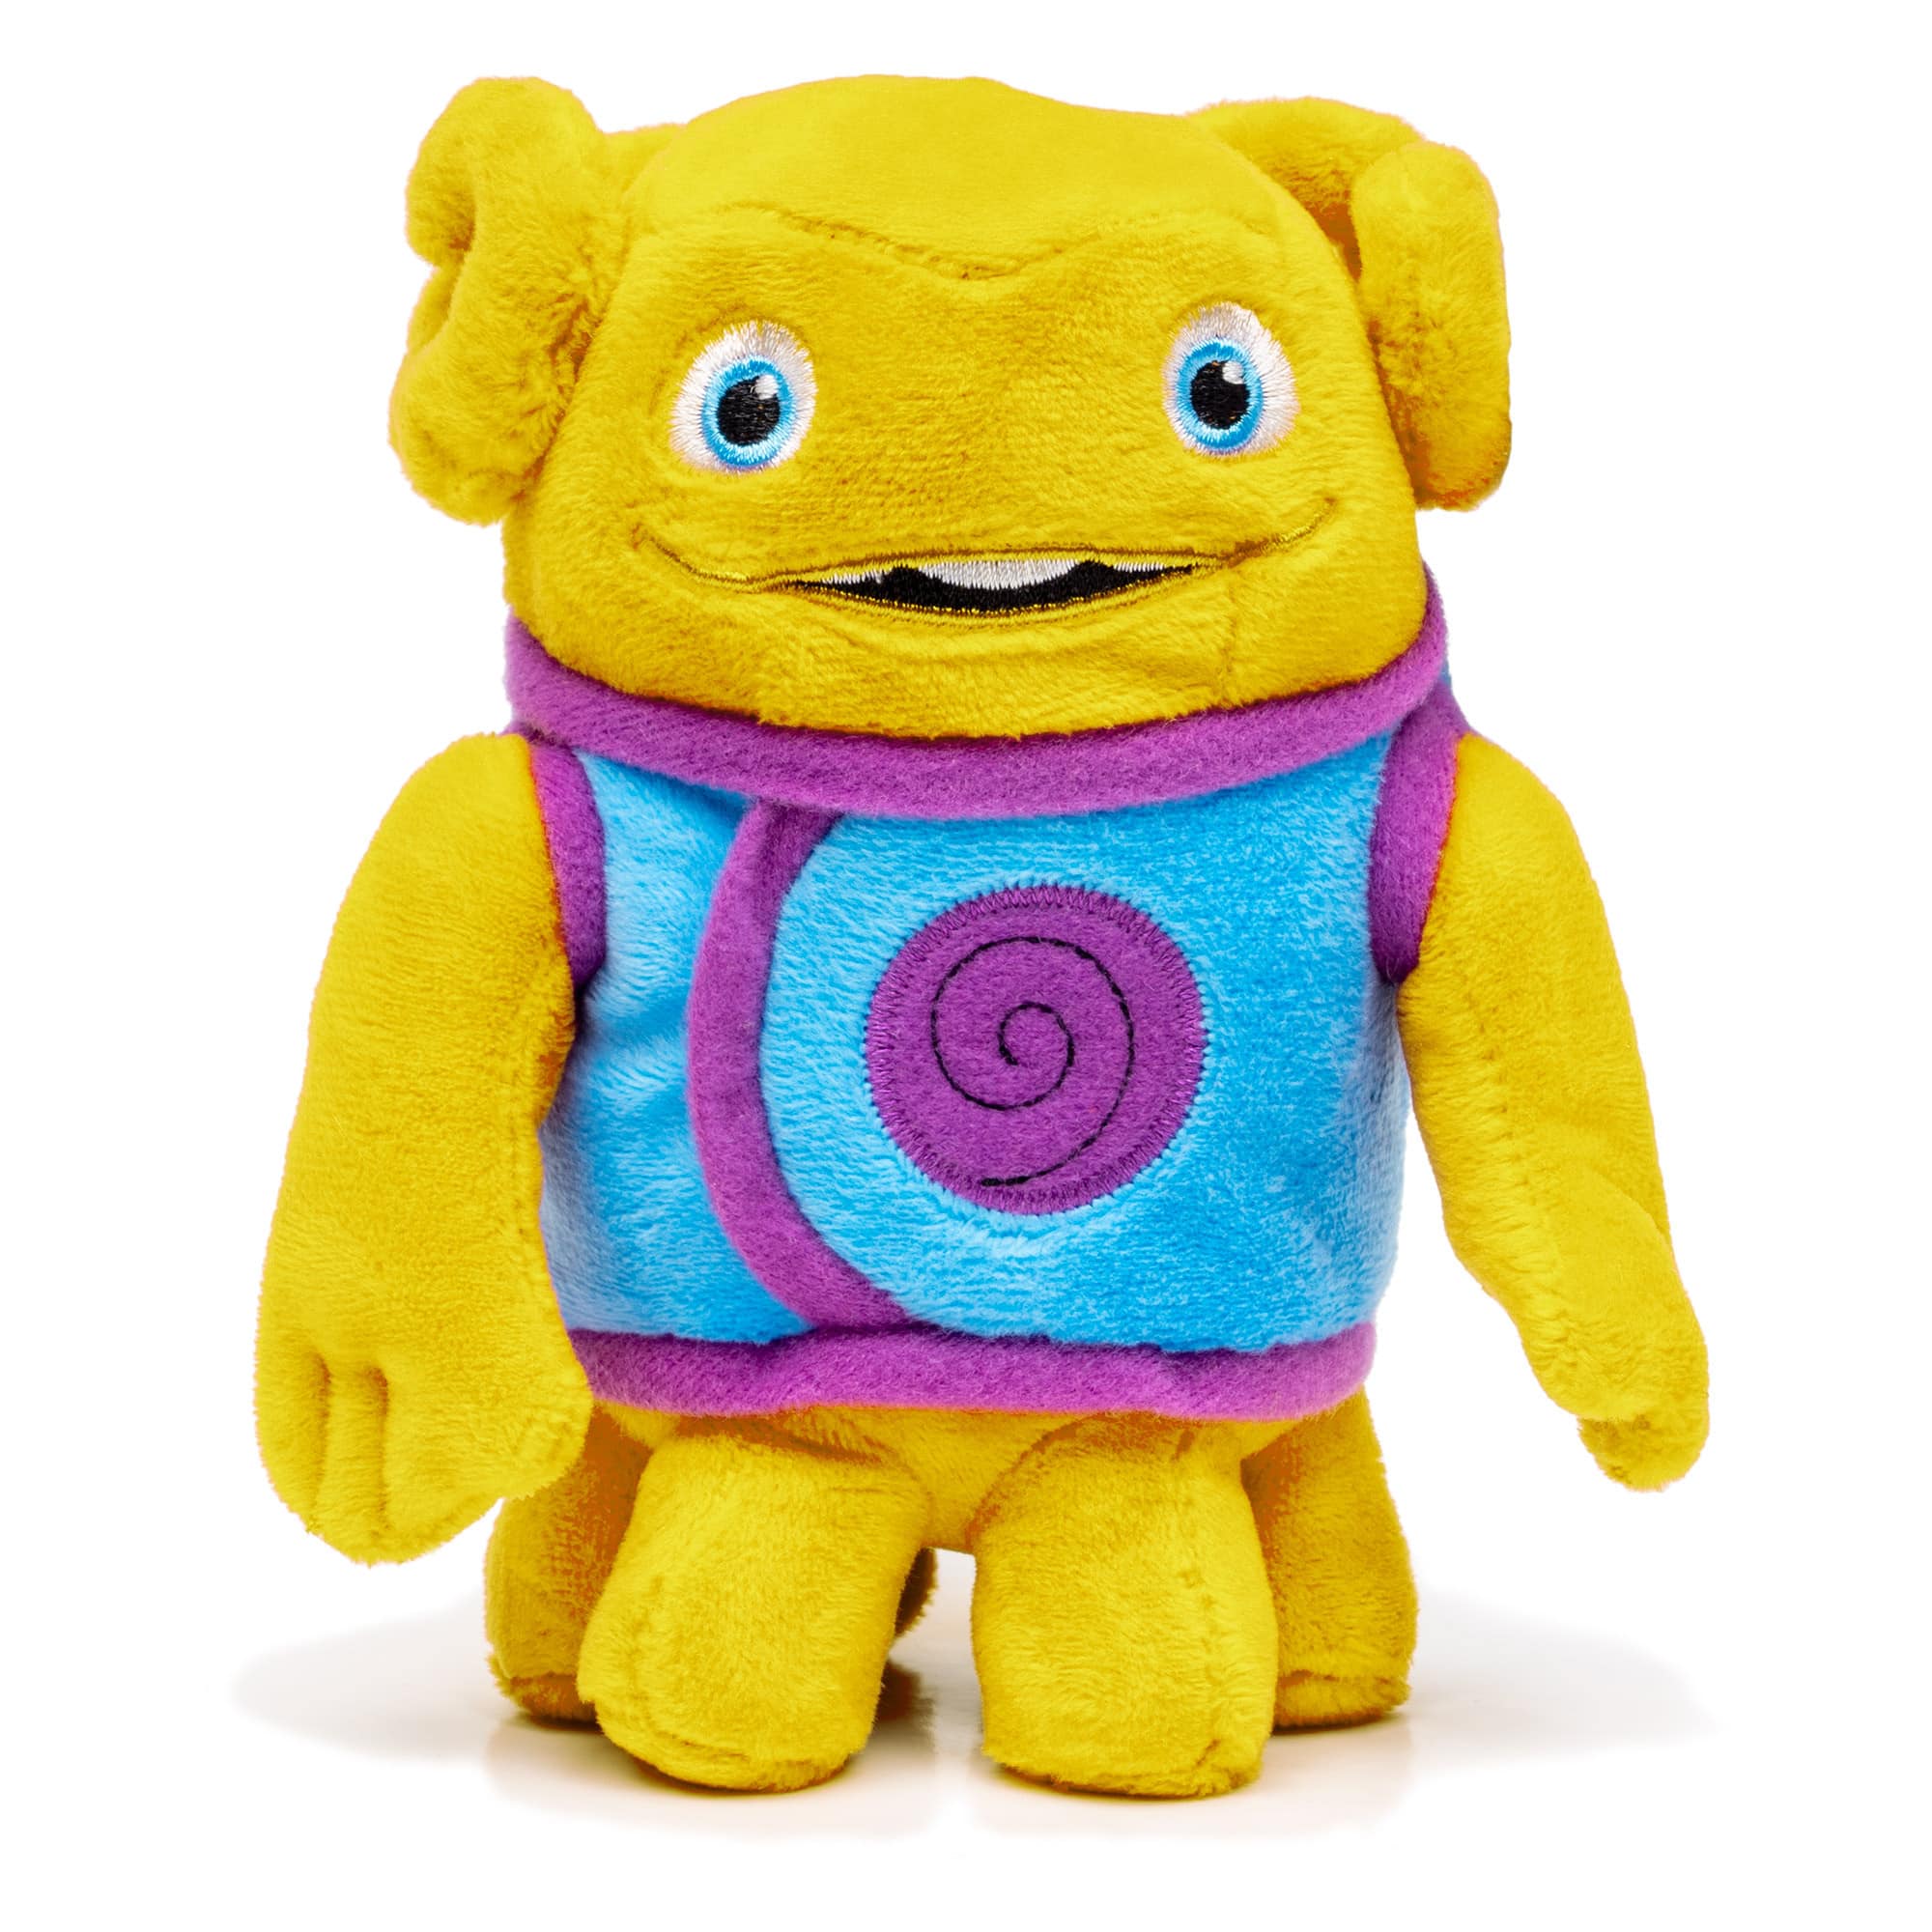 DreamWorks Home - Yellow Oh 6-Inch Plush